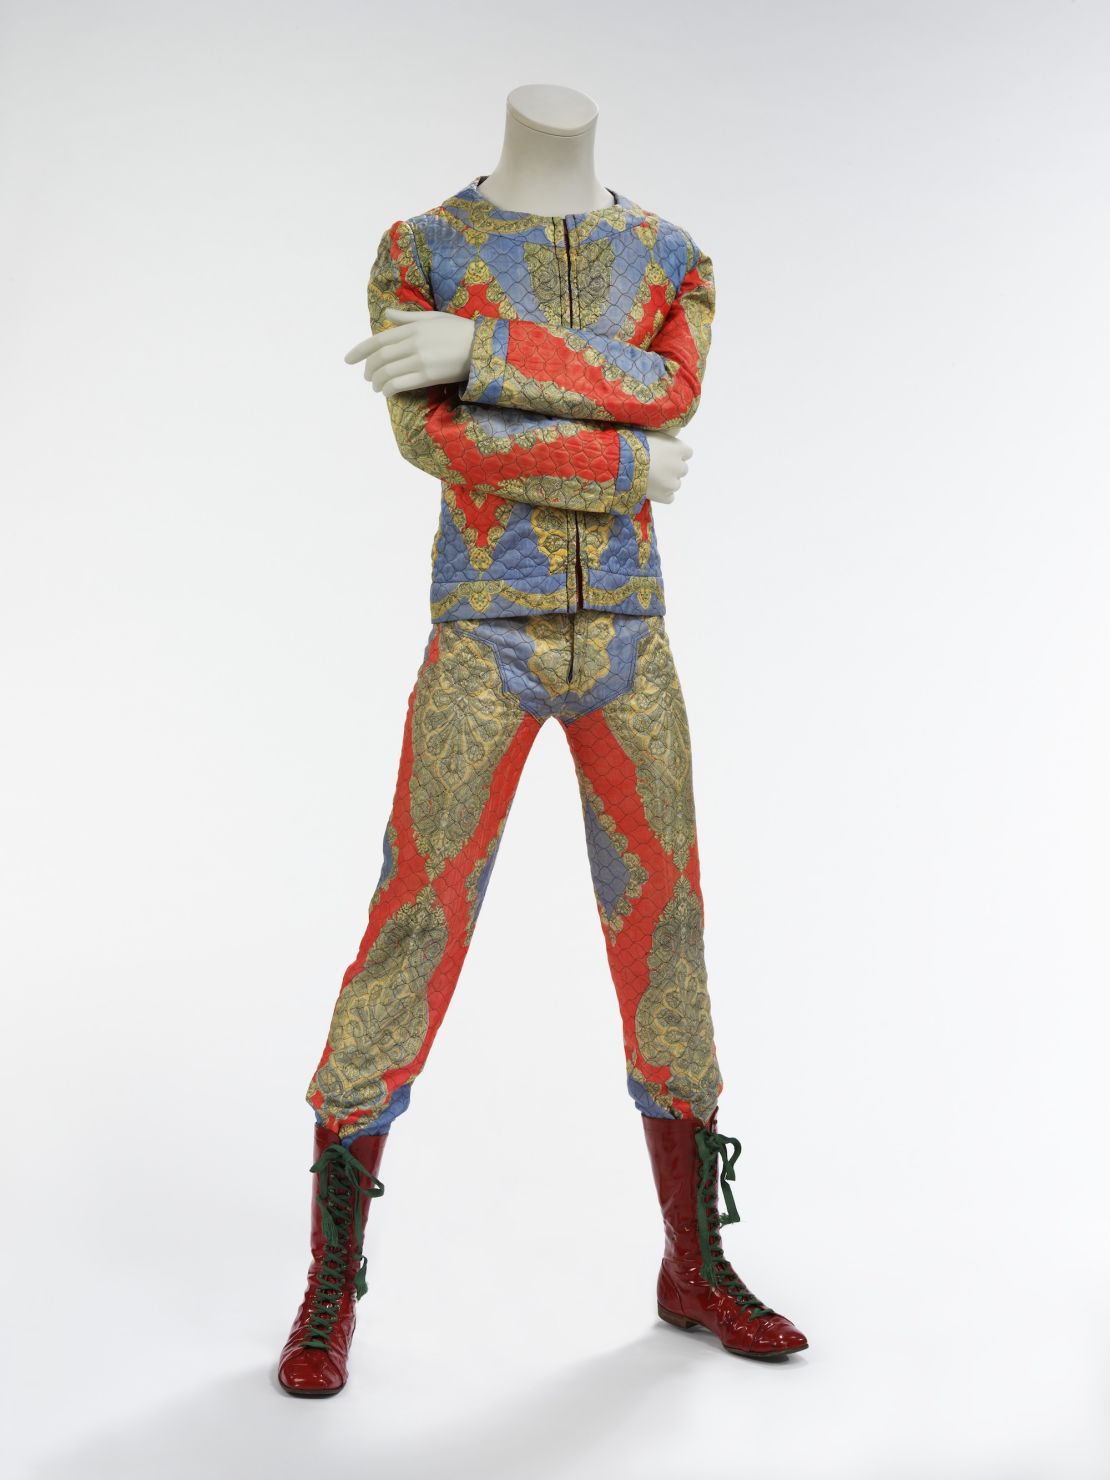 This quilted two-piece suit designed by Freddie Burretti for the "Ziggy Stardust" tour of 1972 will also be on show.